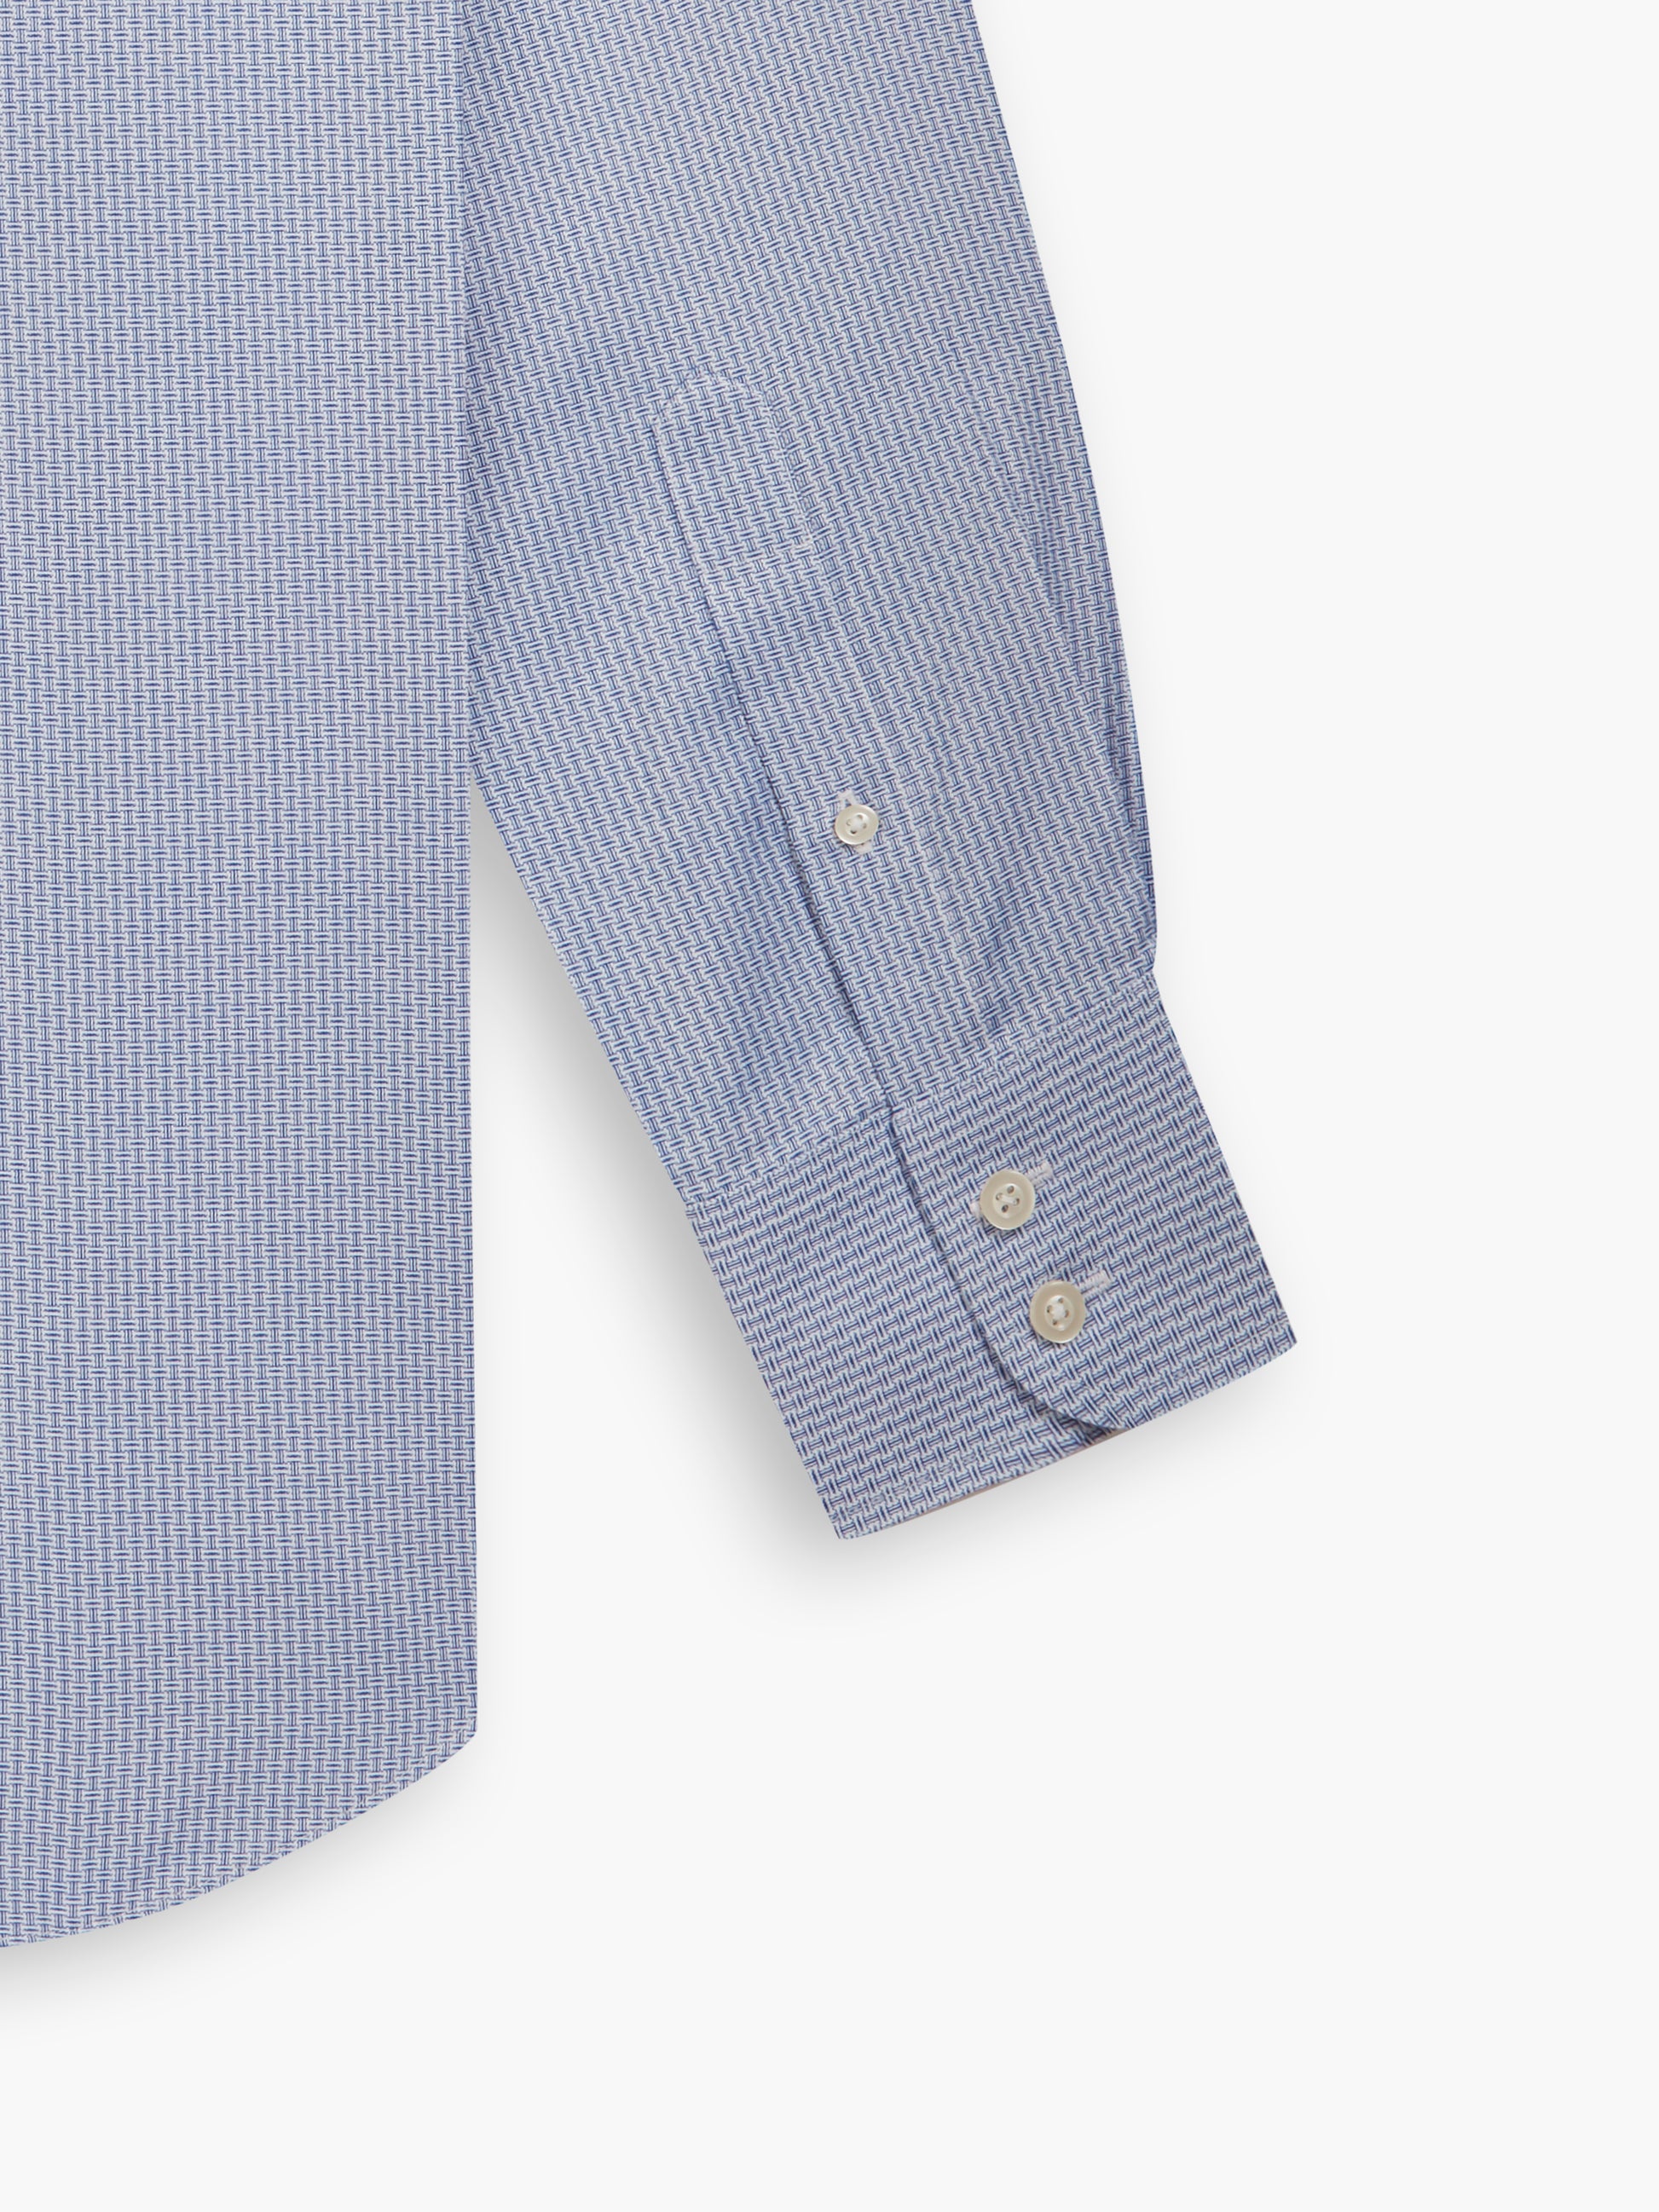 Image 3 of Non-Iron Navy Blue Brick Geometric Dobby Fitted Single Cuff Classic Collar Shirt